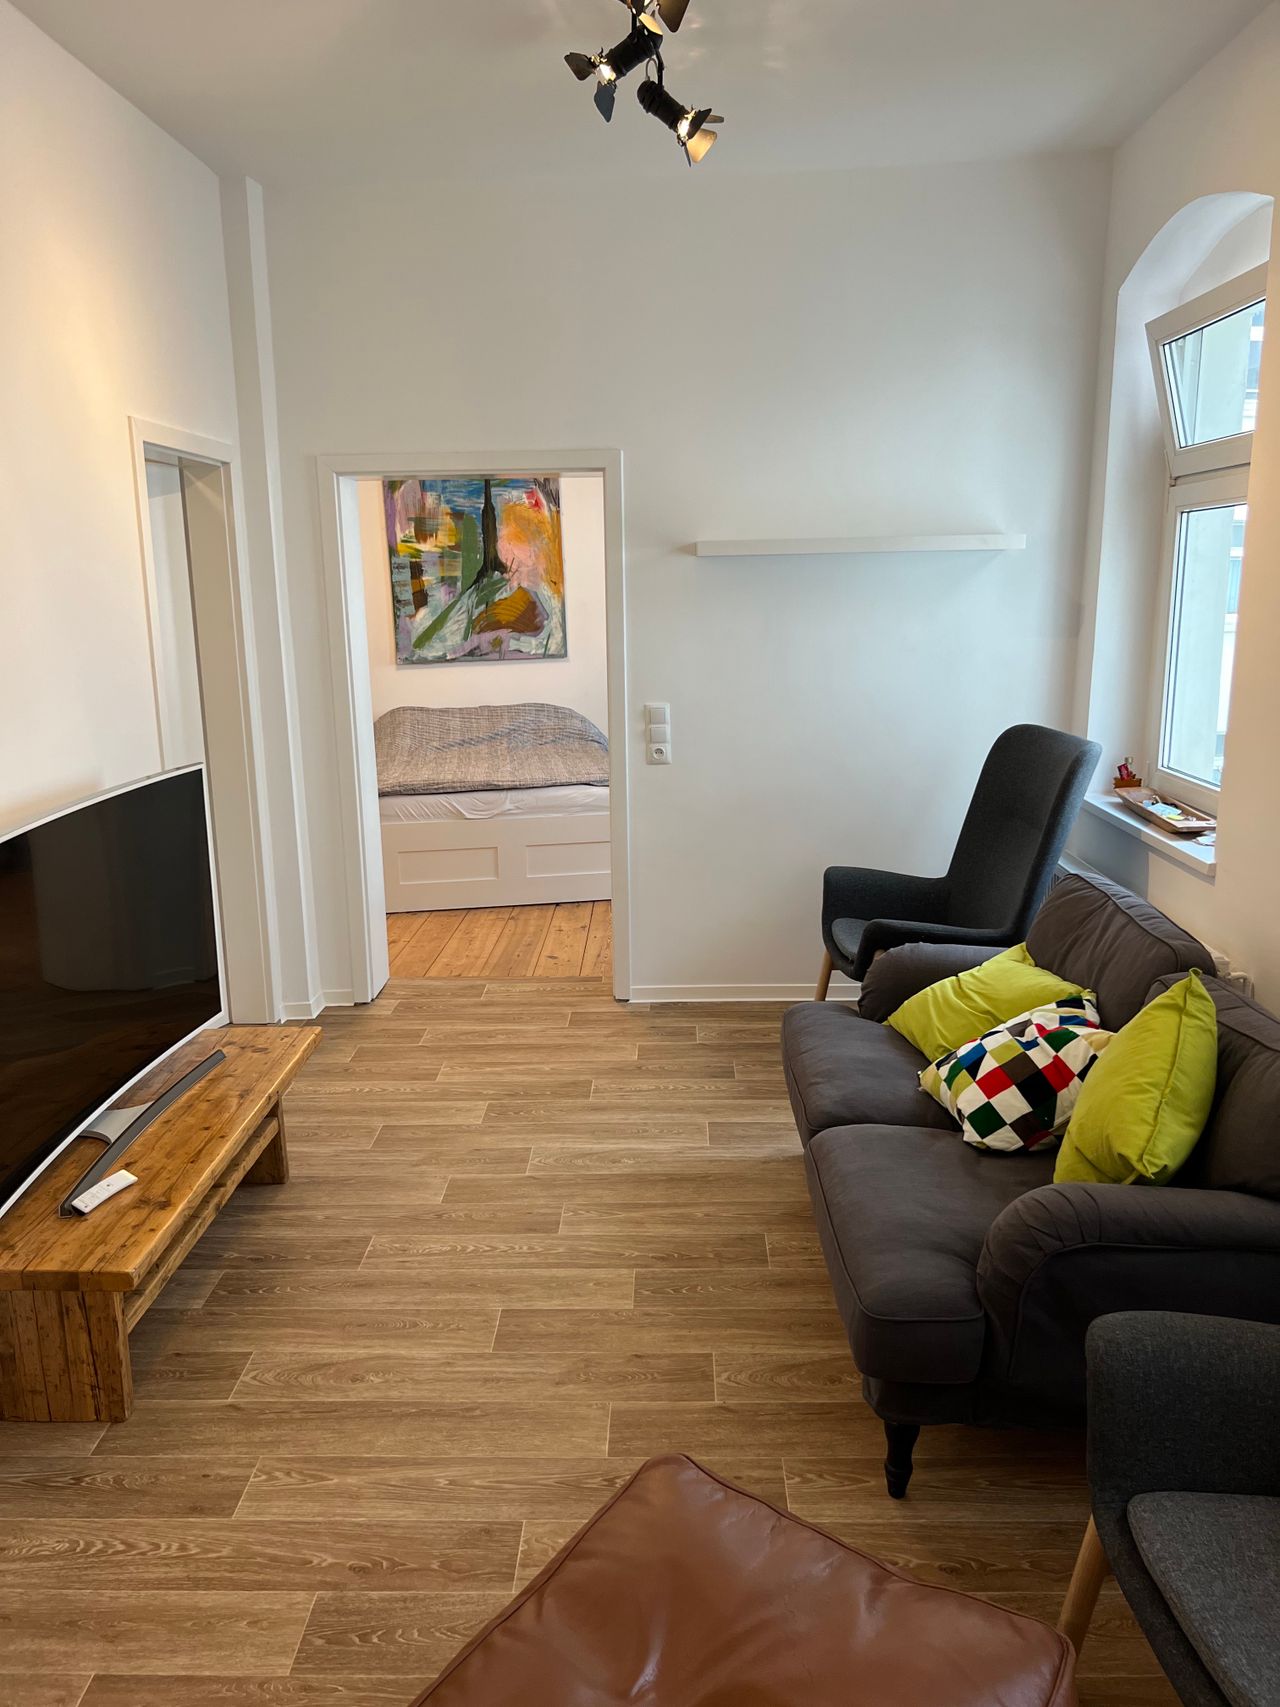 Charming, spacious and well-kept apartment in the heart of Friedrichshain